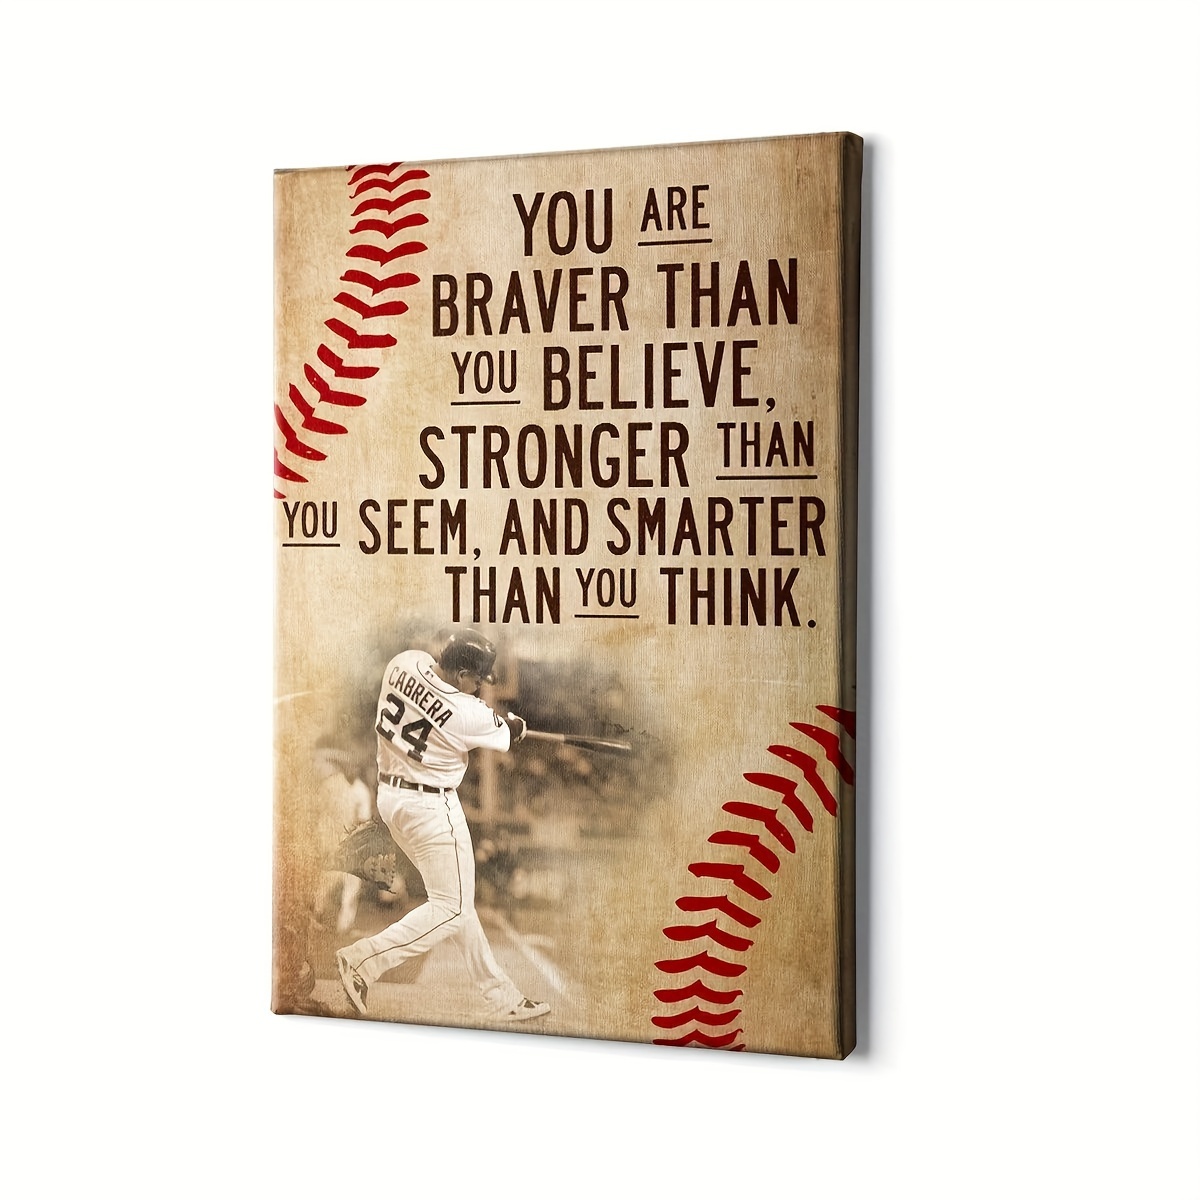 

1pc (customized)custom Print Baseball Personalized Canvas Wall Art You Are Braver Than You Believe, With Frame Ready To Hang 11.8inx15.7inch